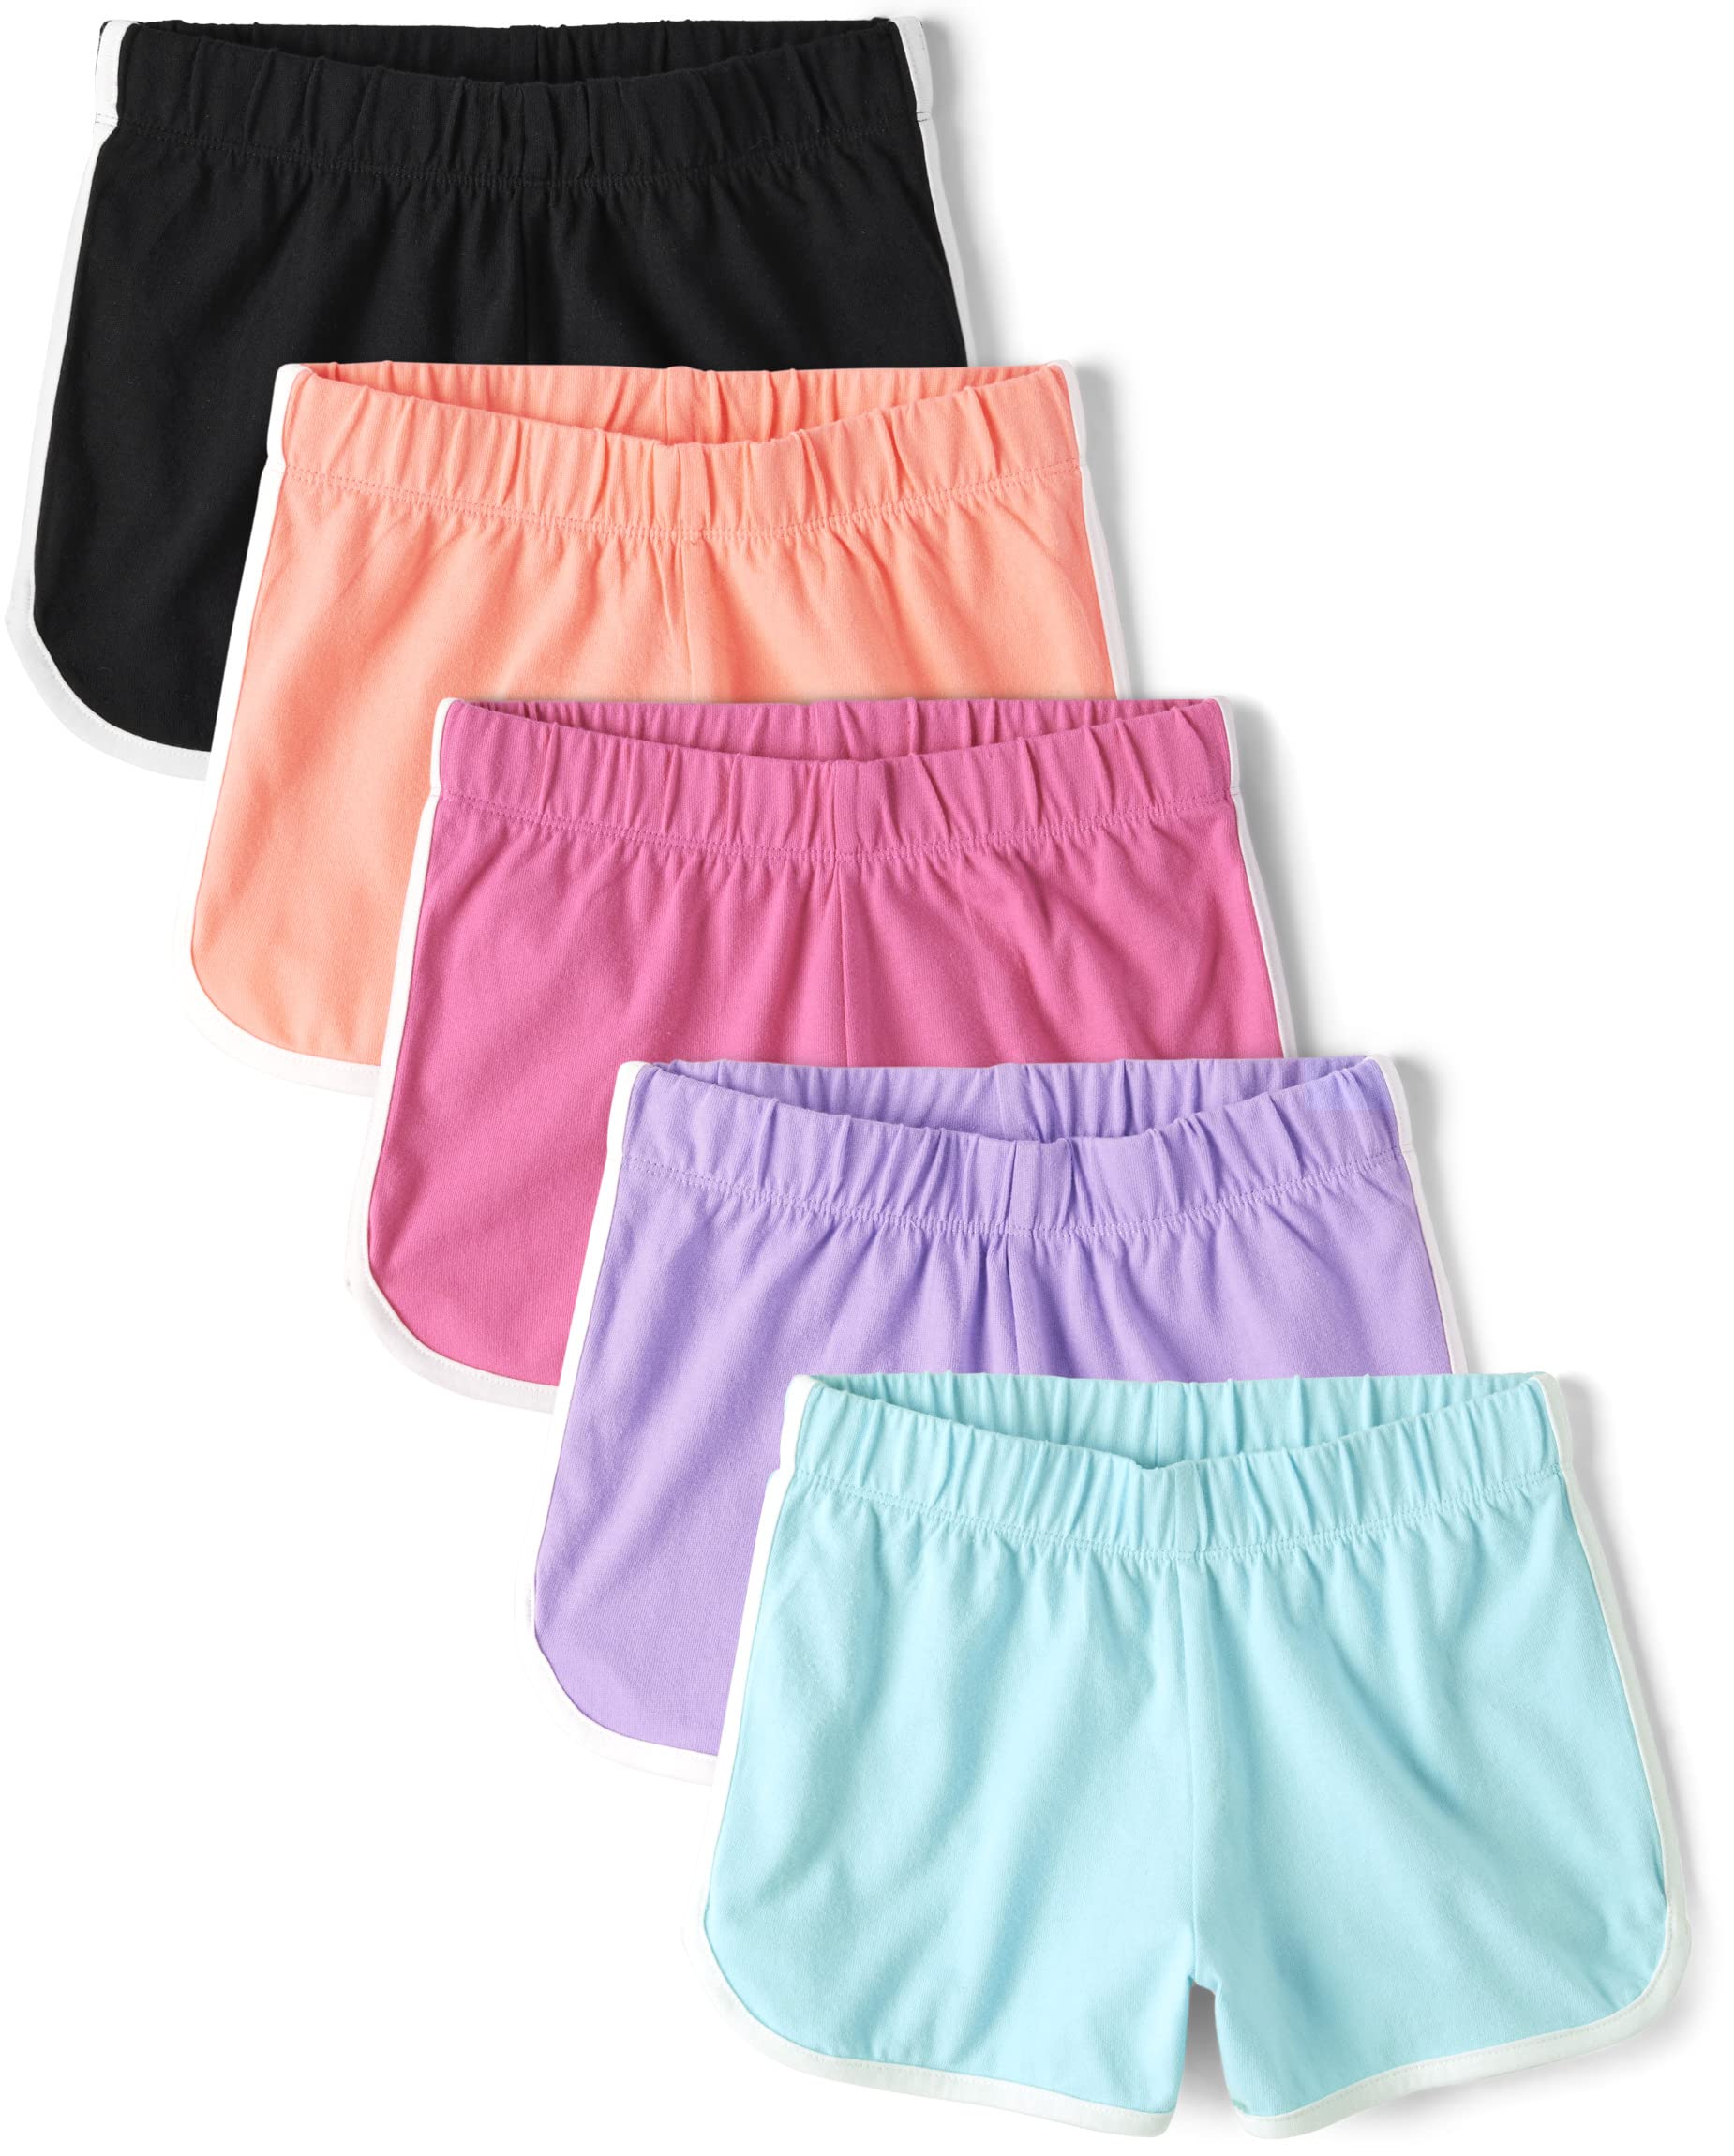 The Children's Place girls Dophin Shorts